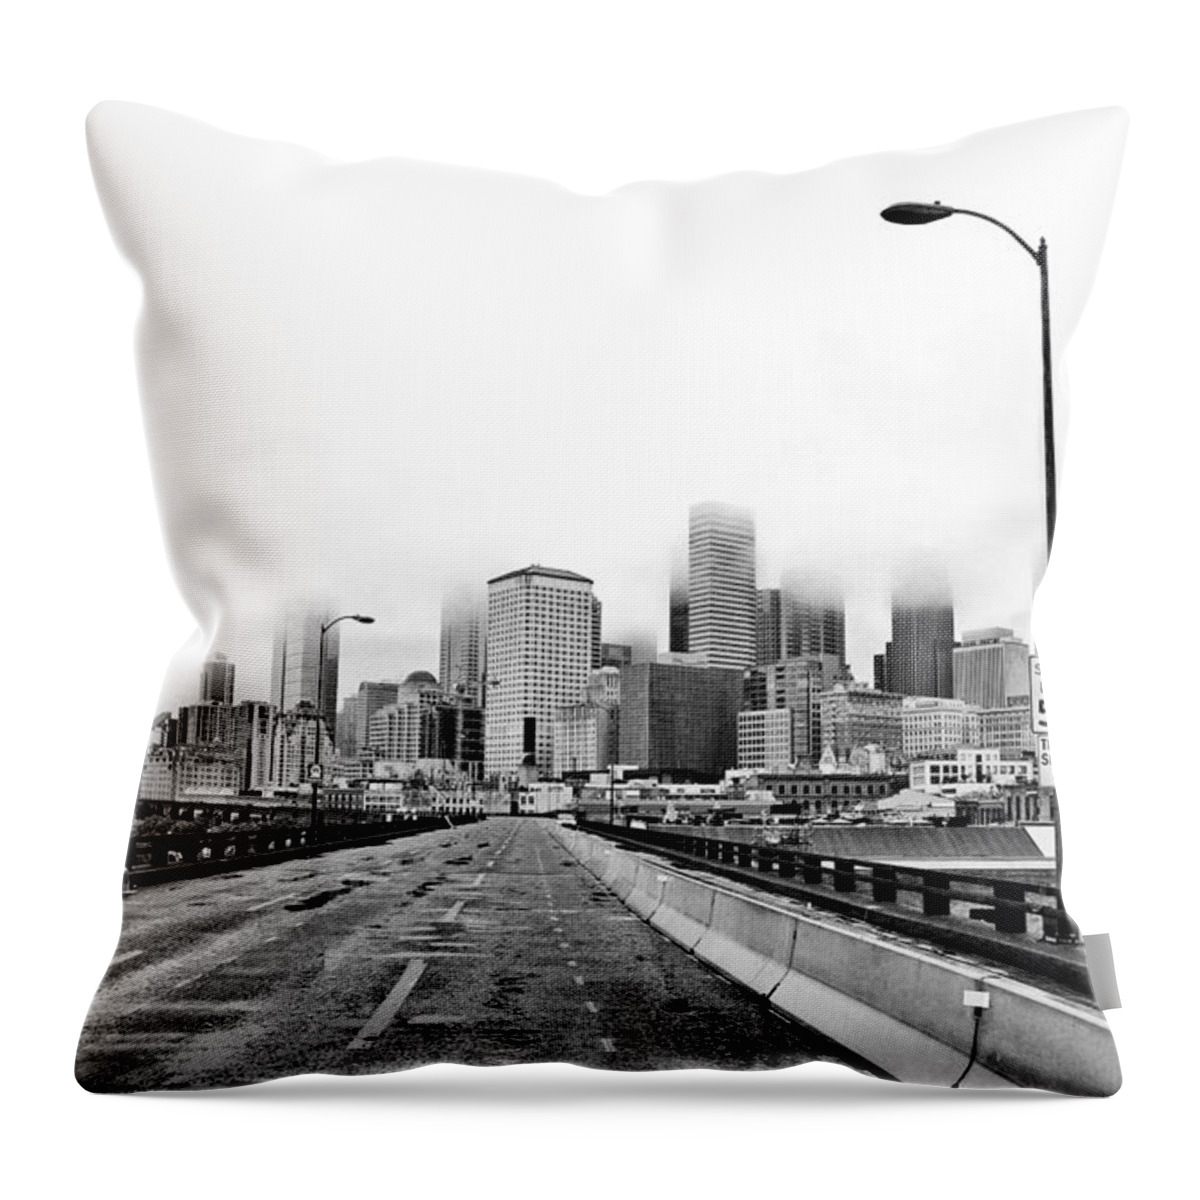 Seattle Throw Pillow featuring the photograph Alaskan Way Viaduct Downtown Seattle by Pelo Blanco Photo